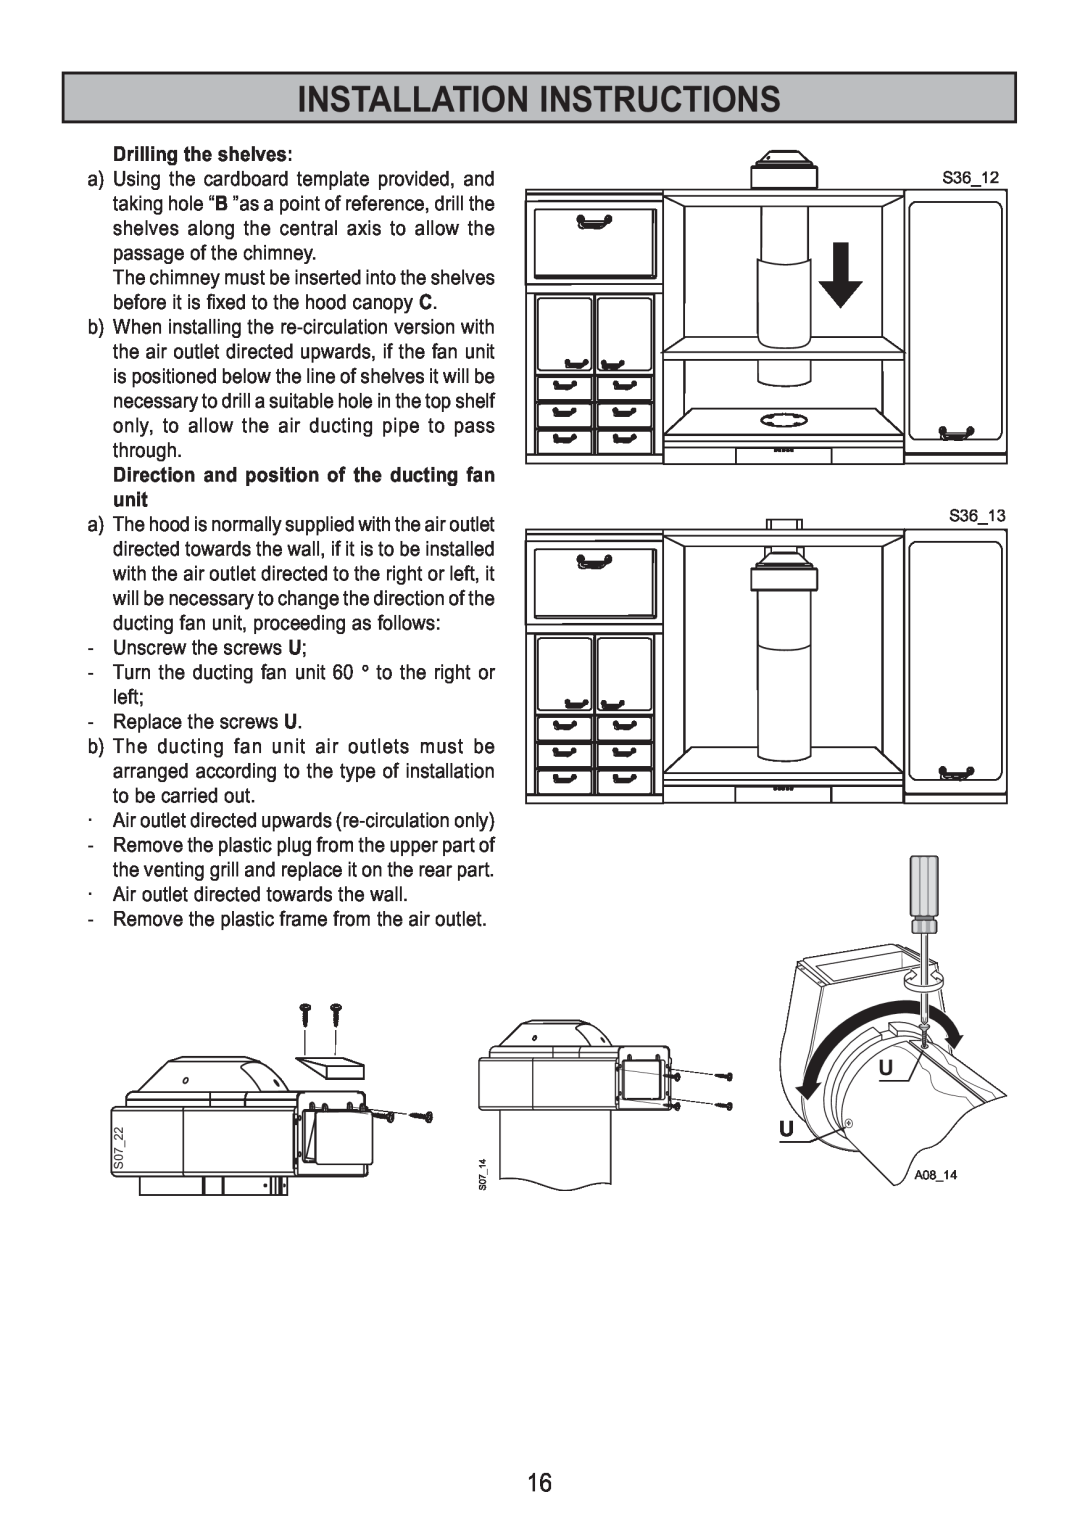 Zanussi ZHC 95 ALU manual Drilling the shelves, Direction and position of the ducting fan unit, Installation Instructions 